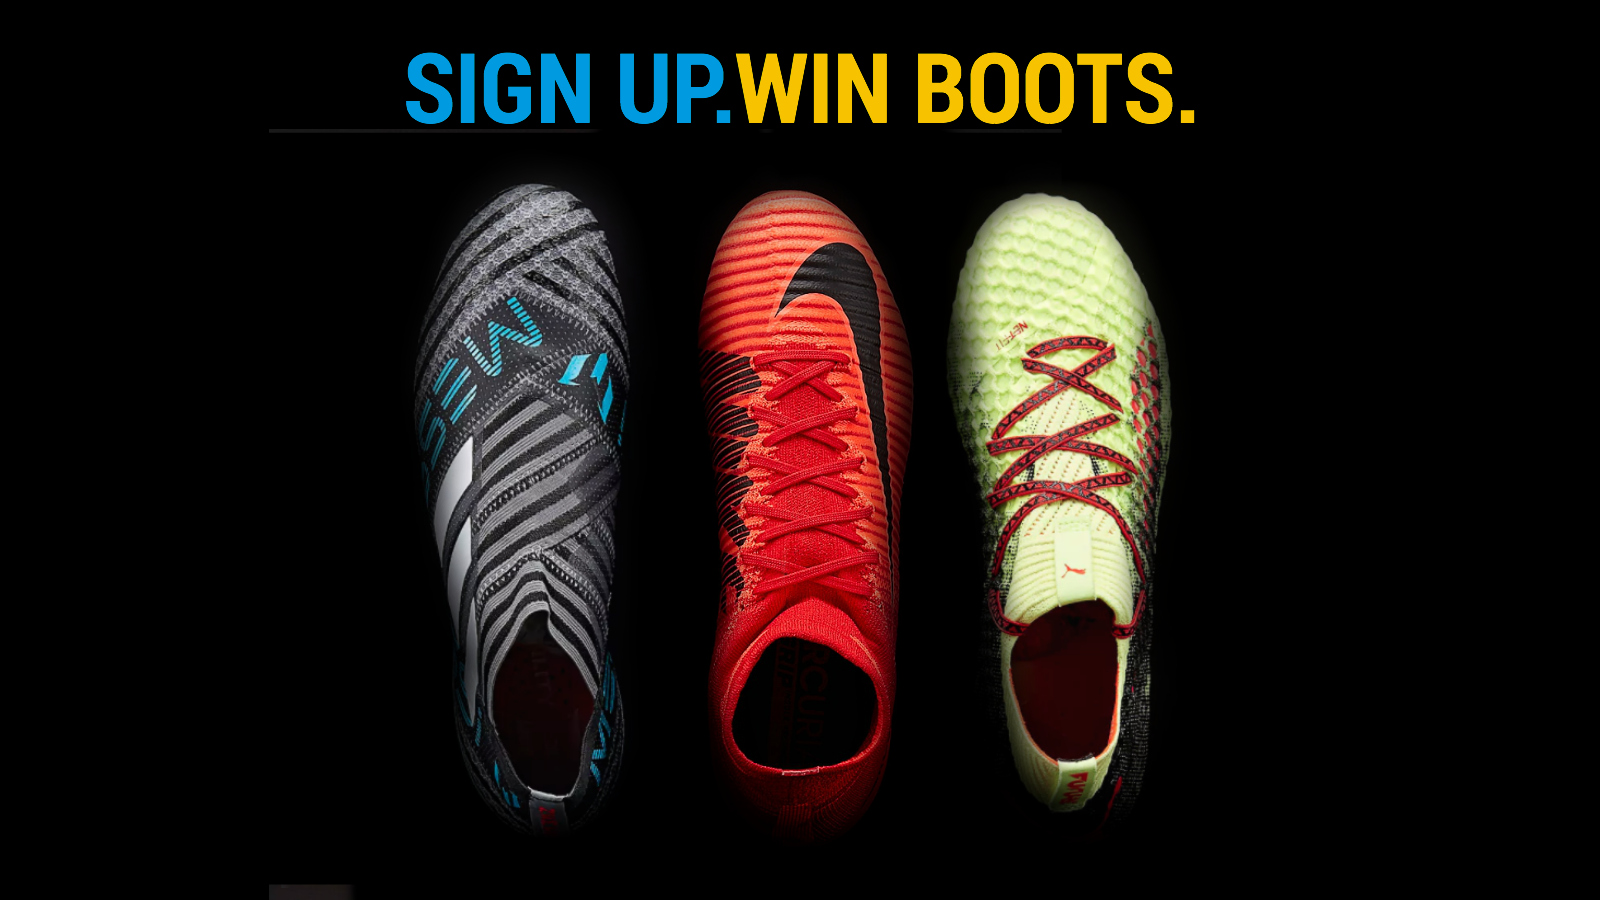 Sign Up For Our Weekly Email. Win A Pair Of Cleats.